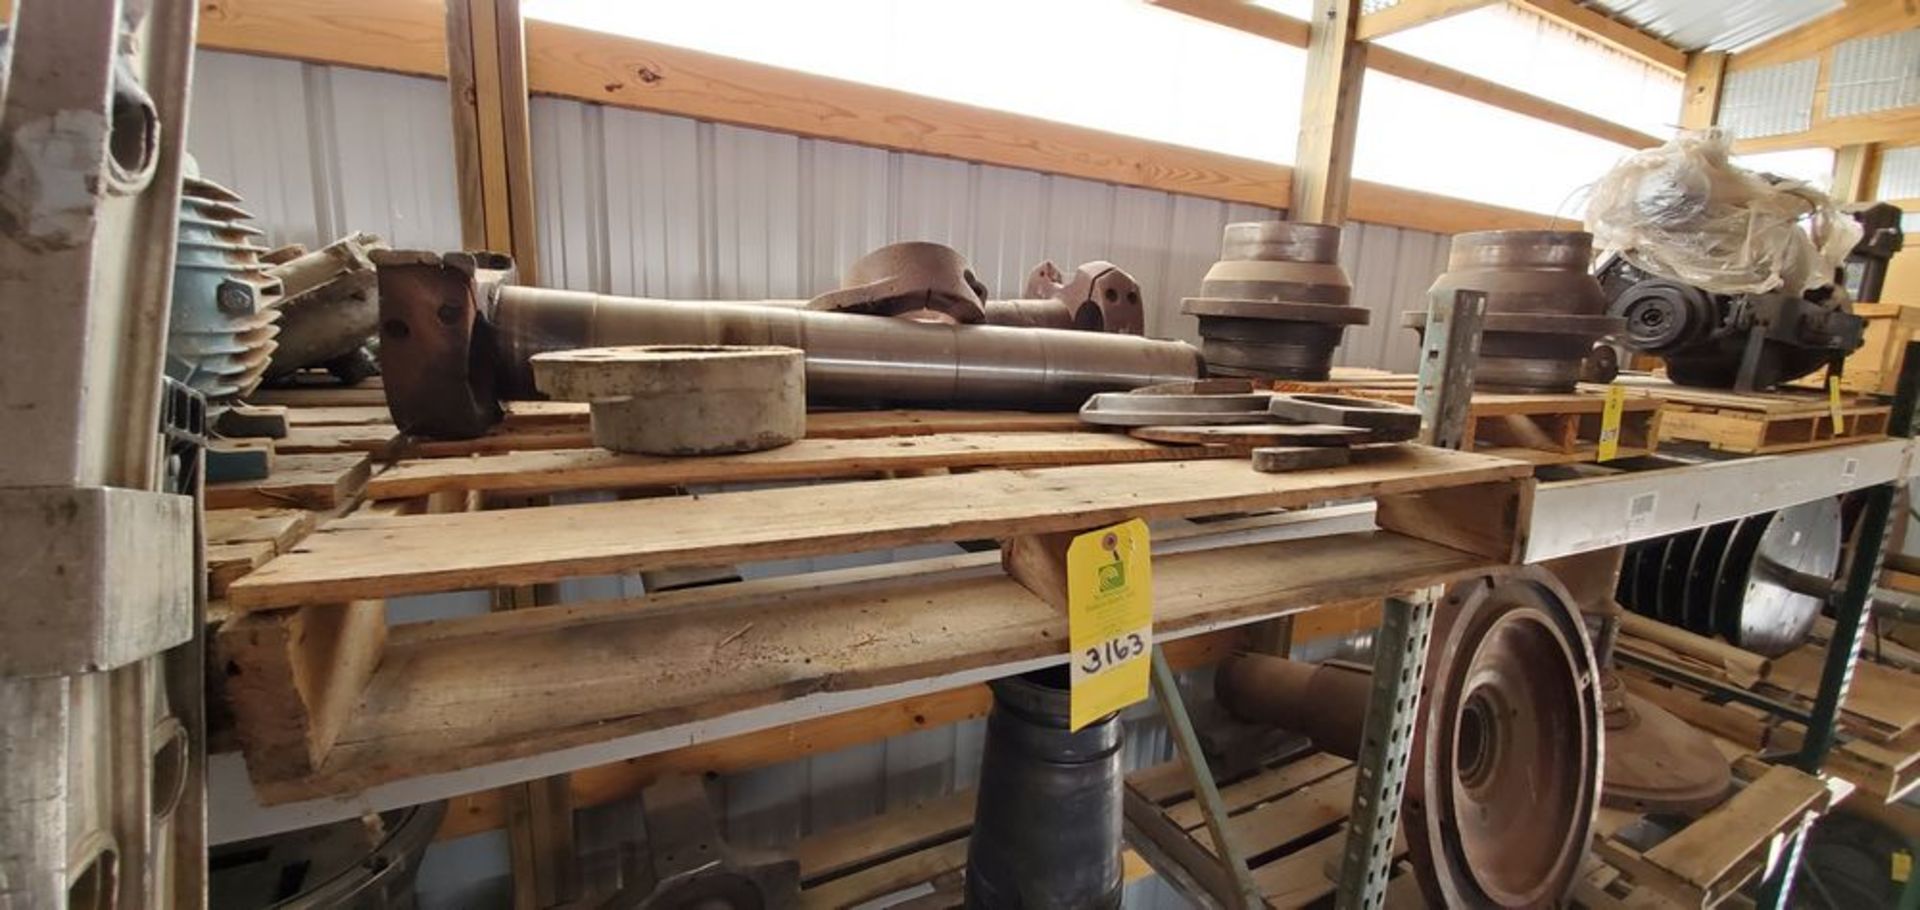 Located in Canon City, CO -- Lot: 2 501 mainshafts, 2 501 shear pin collar and mainshaft nut loading